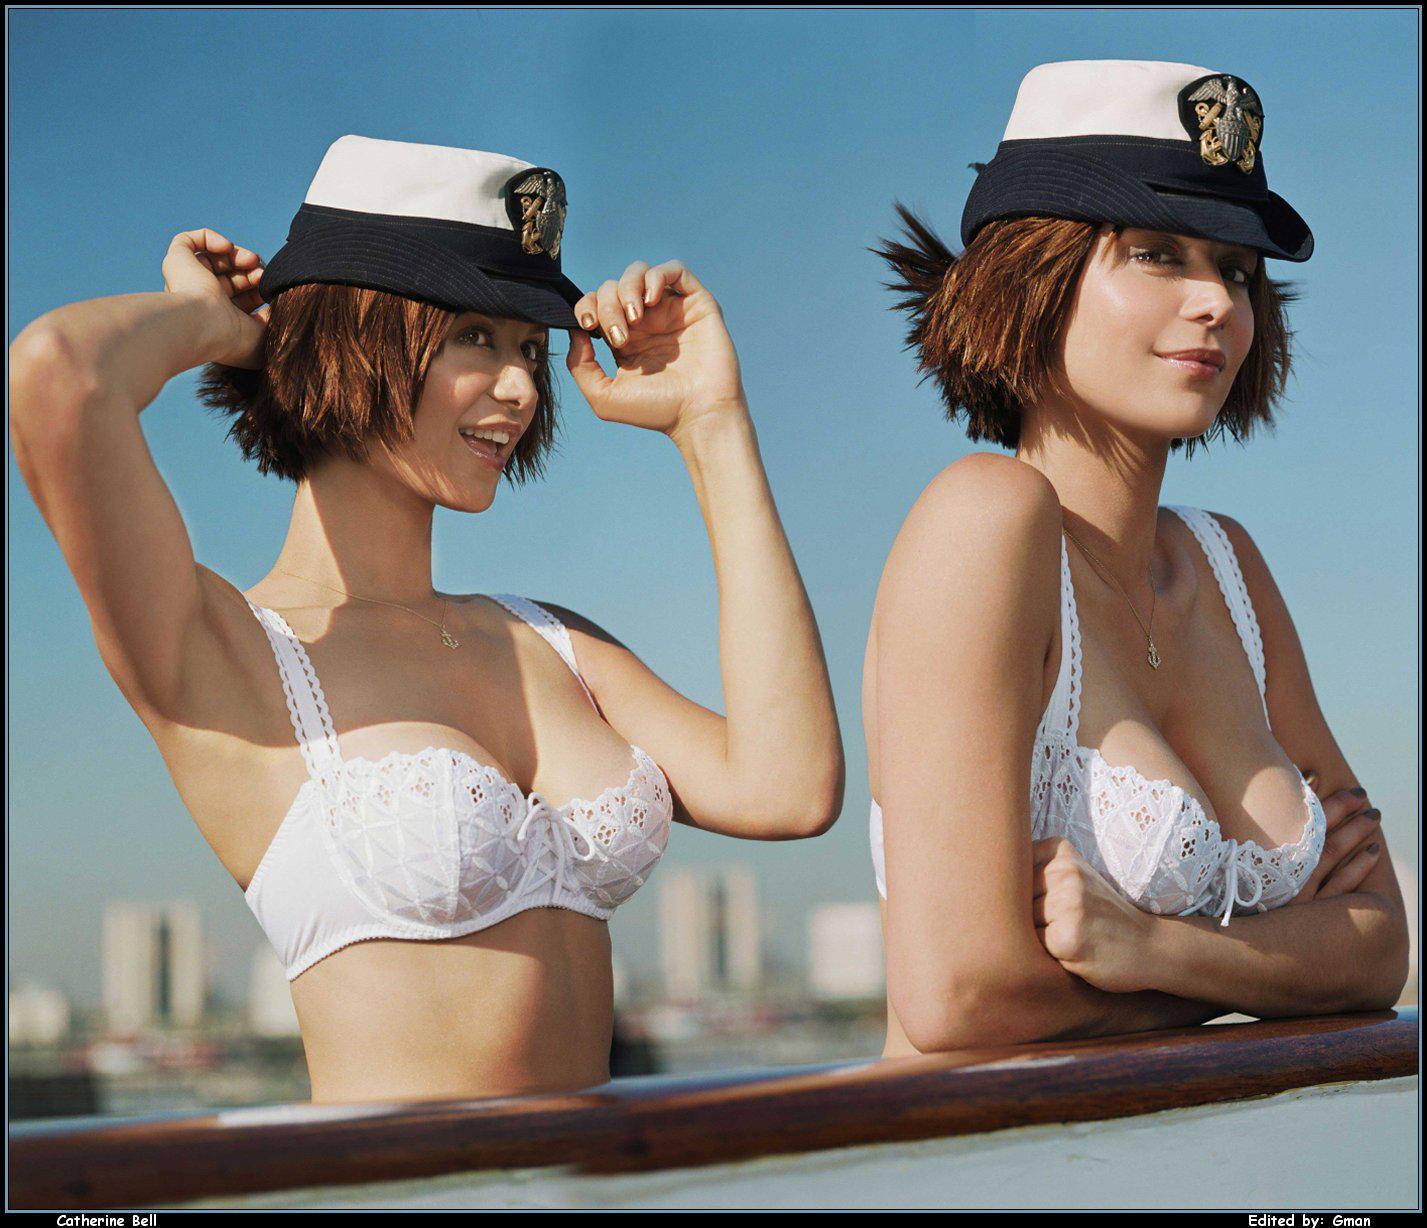 Rule 5 Saturday - Catherine Bell - When in Doubt, Send the Marines.